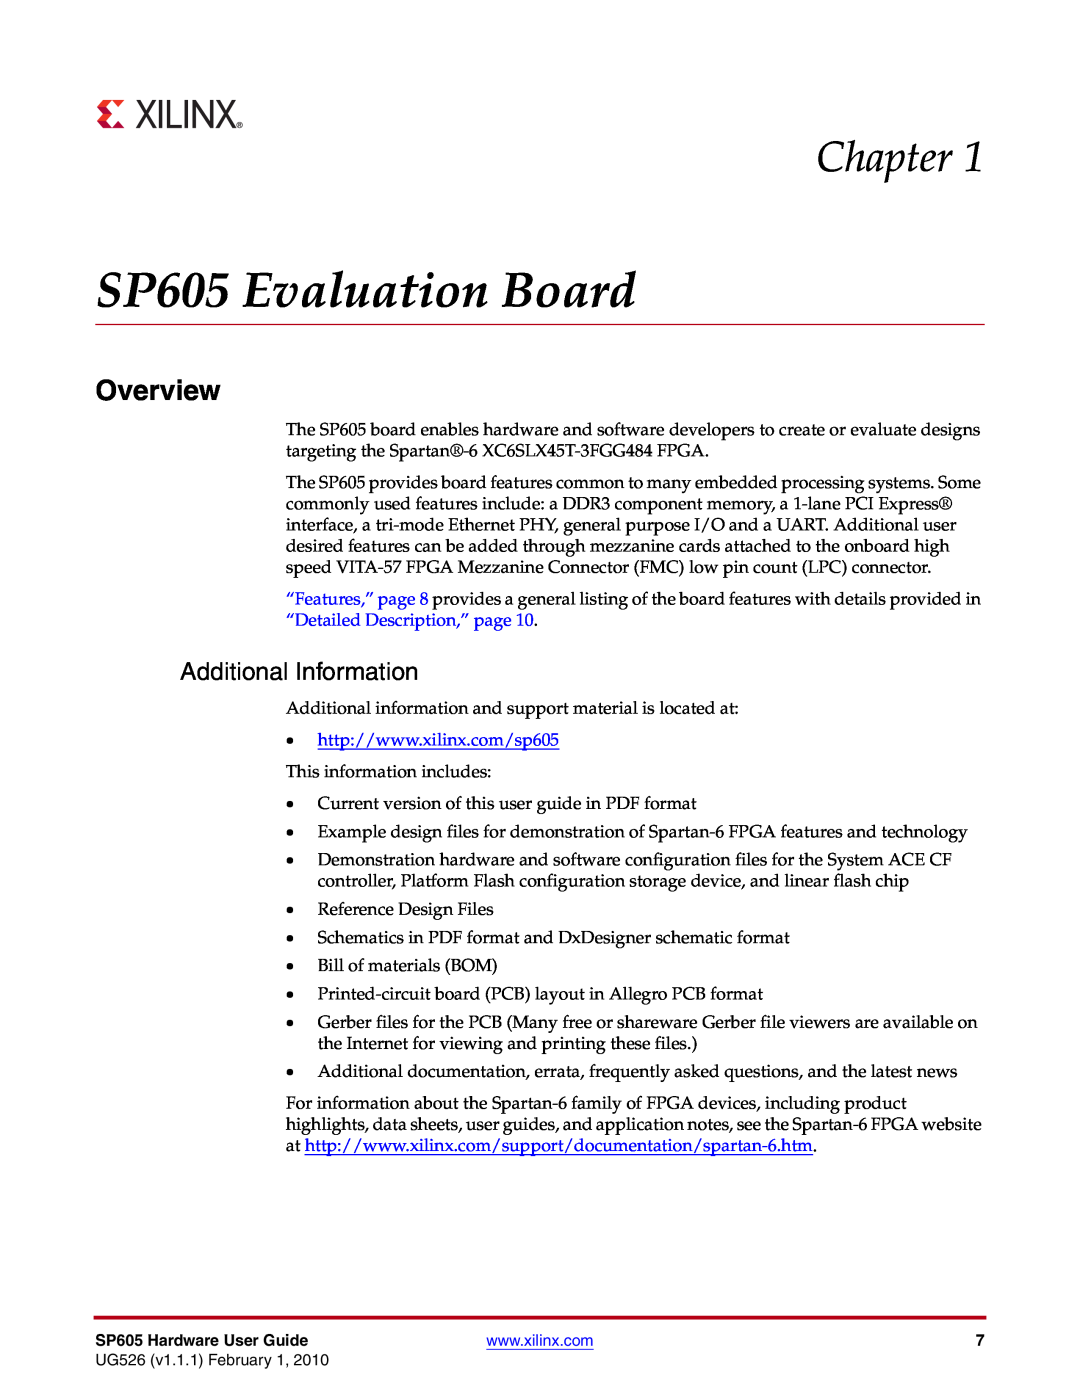 Xilinx manual SP605 Evaluation Board, Chapter, Overview, Additional Information 